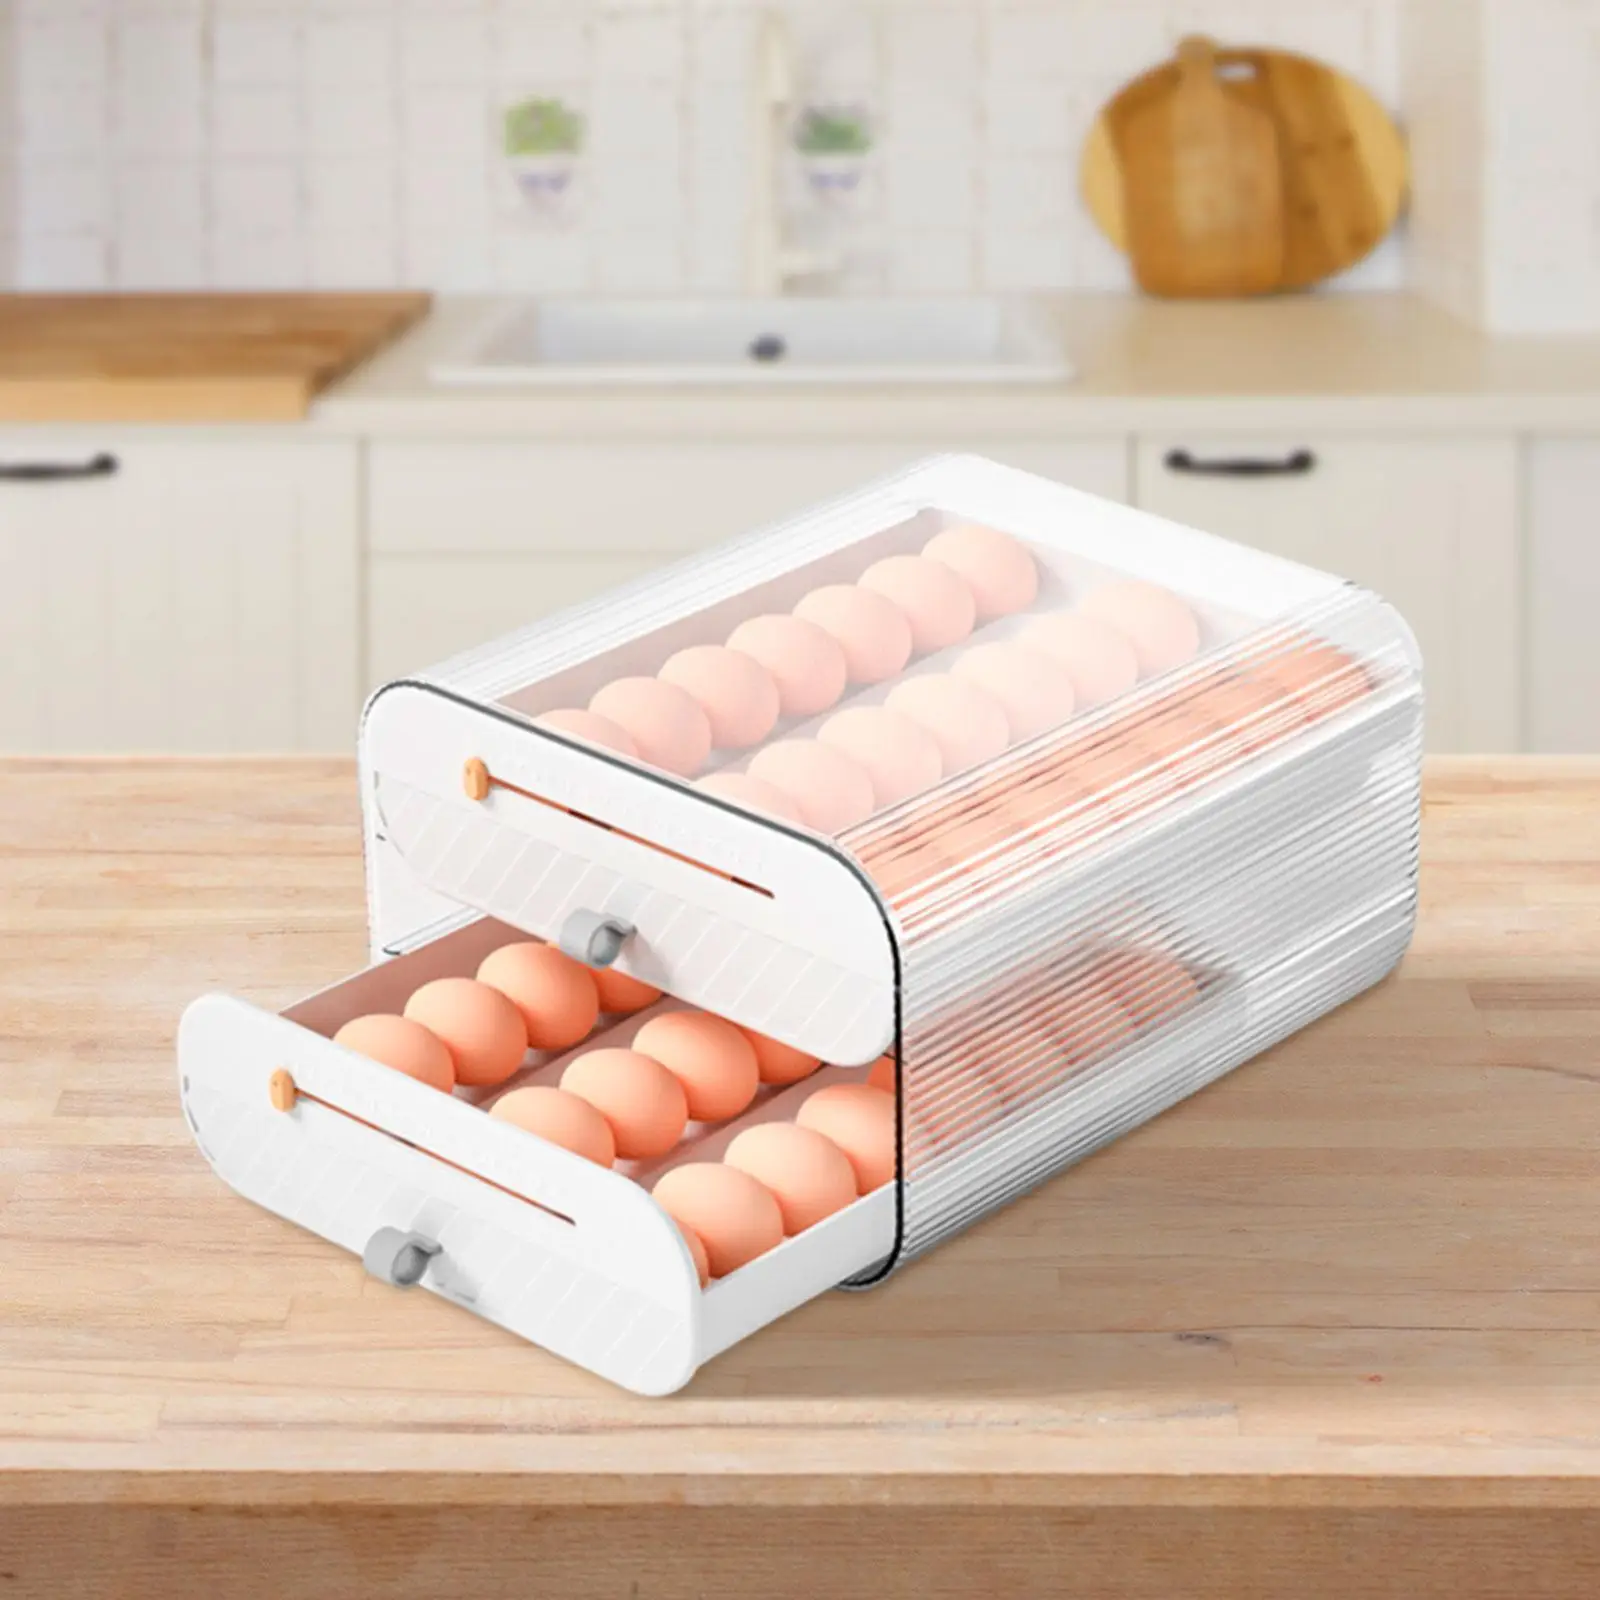 Egg Holder Stackable Durable Refrigerator Organizer Bins with Time Marker Kitchen Rolling Eggs Container for Refrigerator Fridge